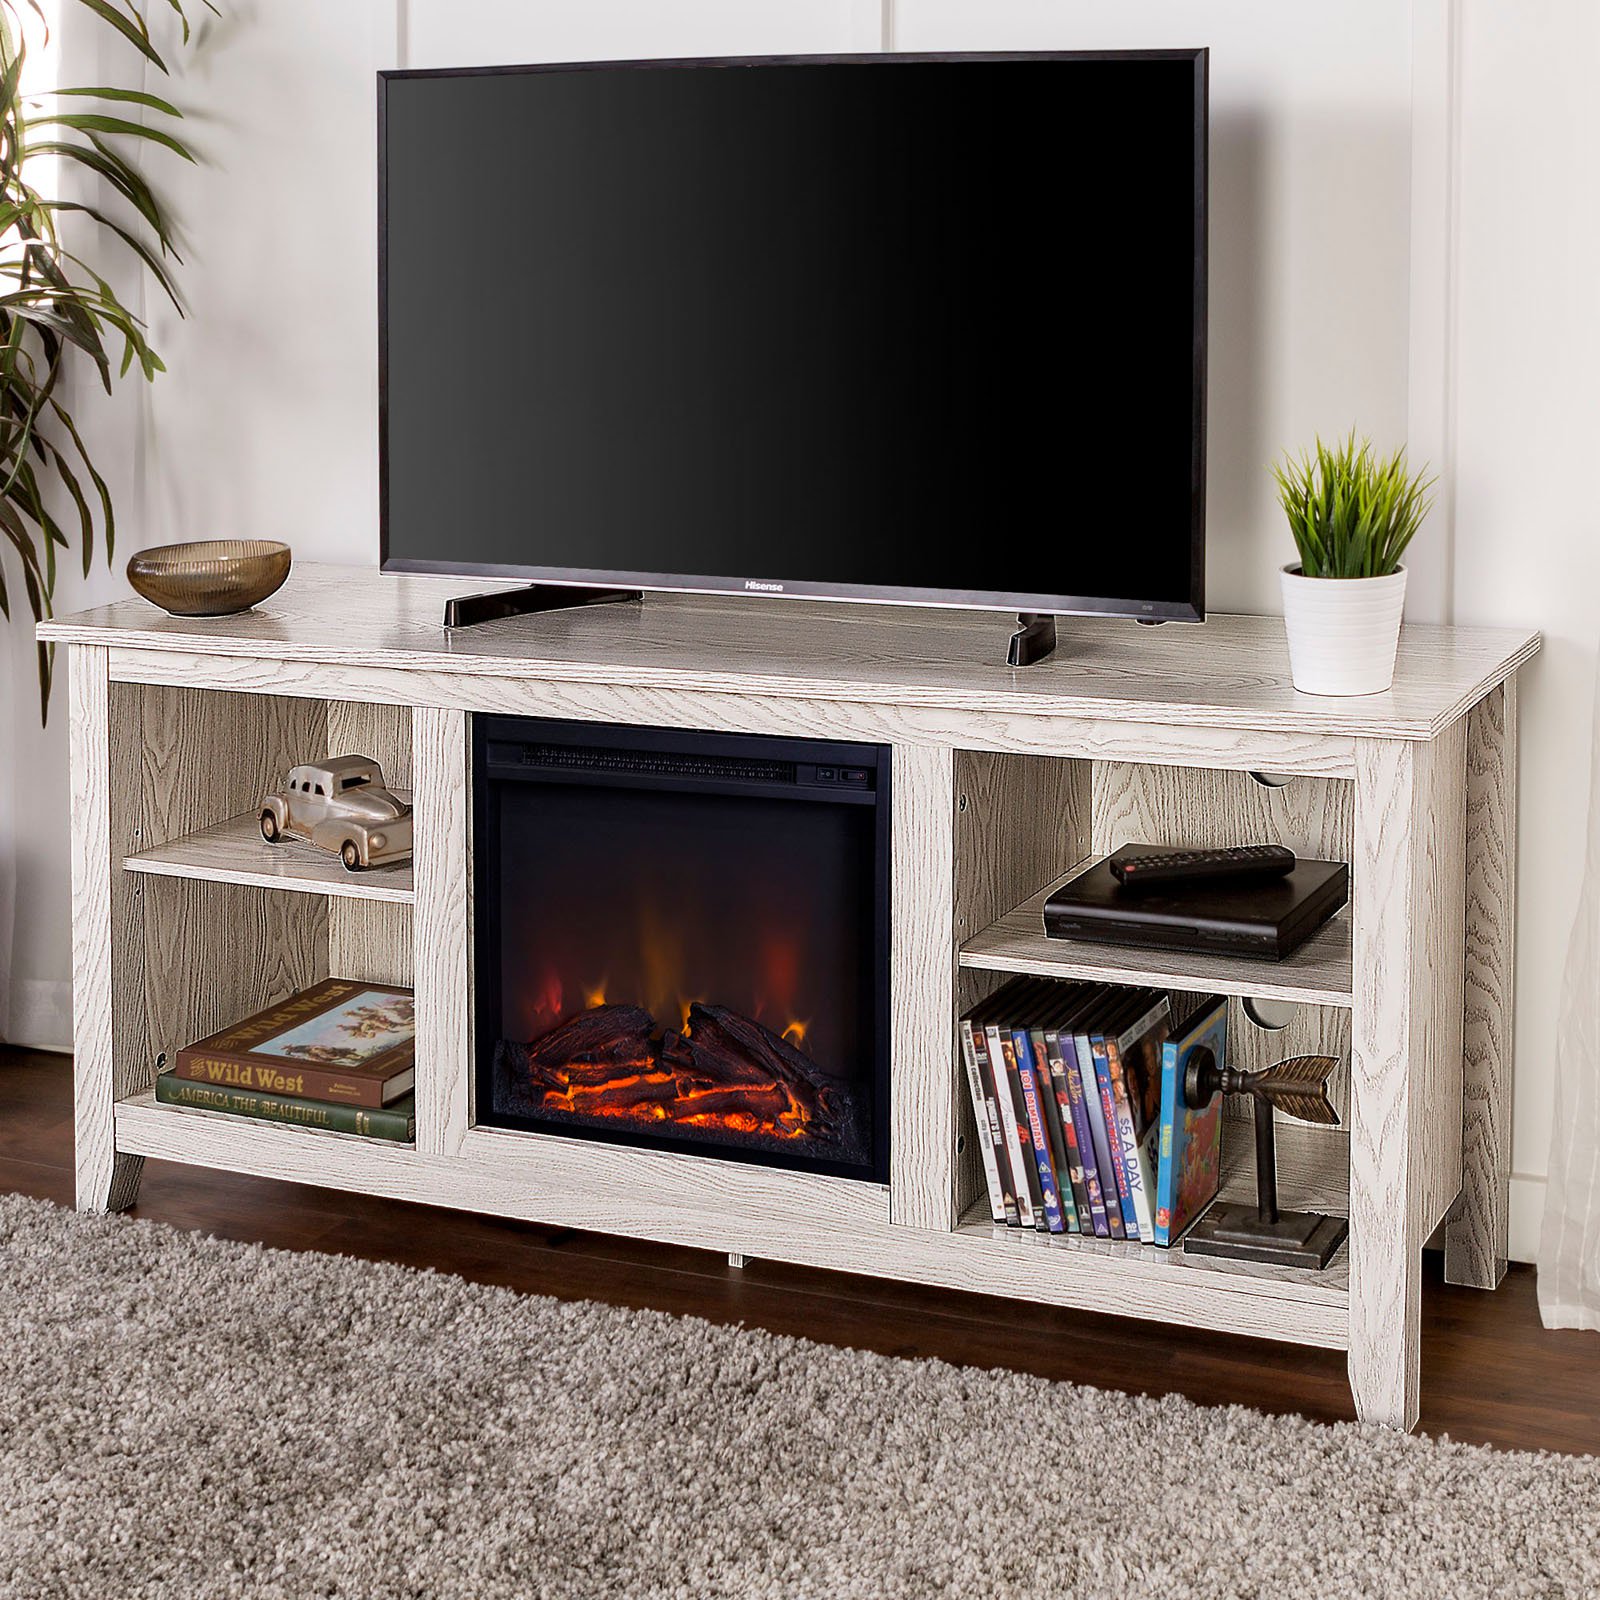 Fireplace Tv Stand for 65 Inch Tv Awesome Walker Edison Fireplace Tv Stand White Wash In 2019